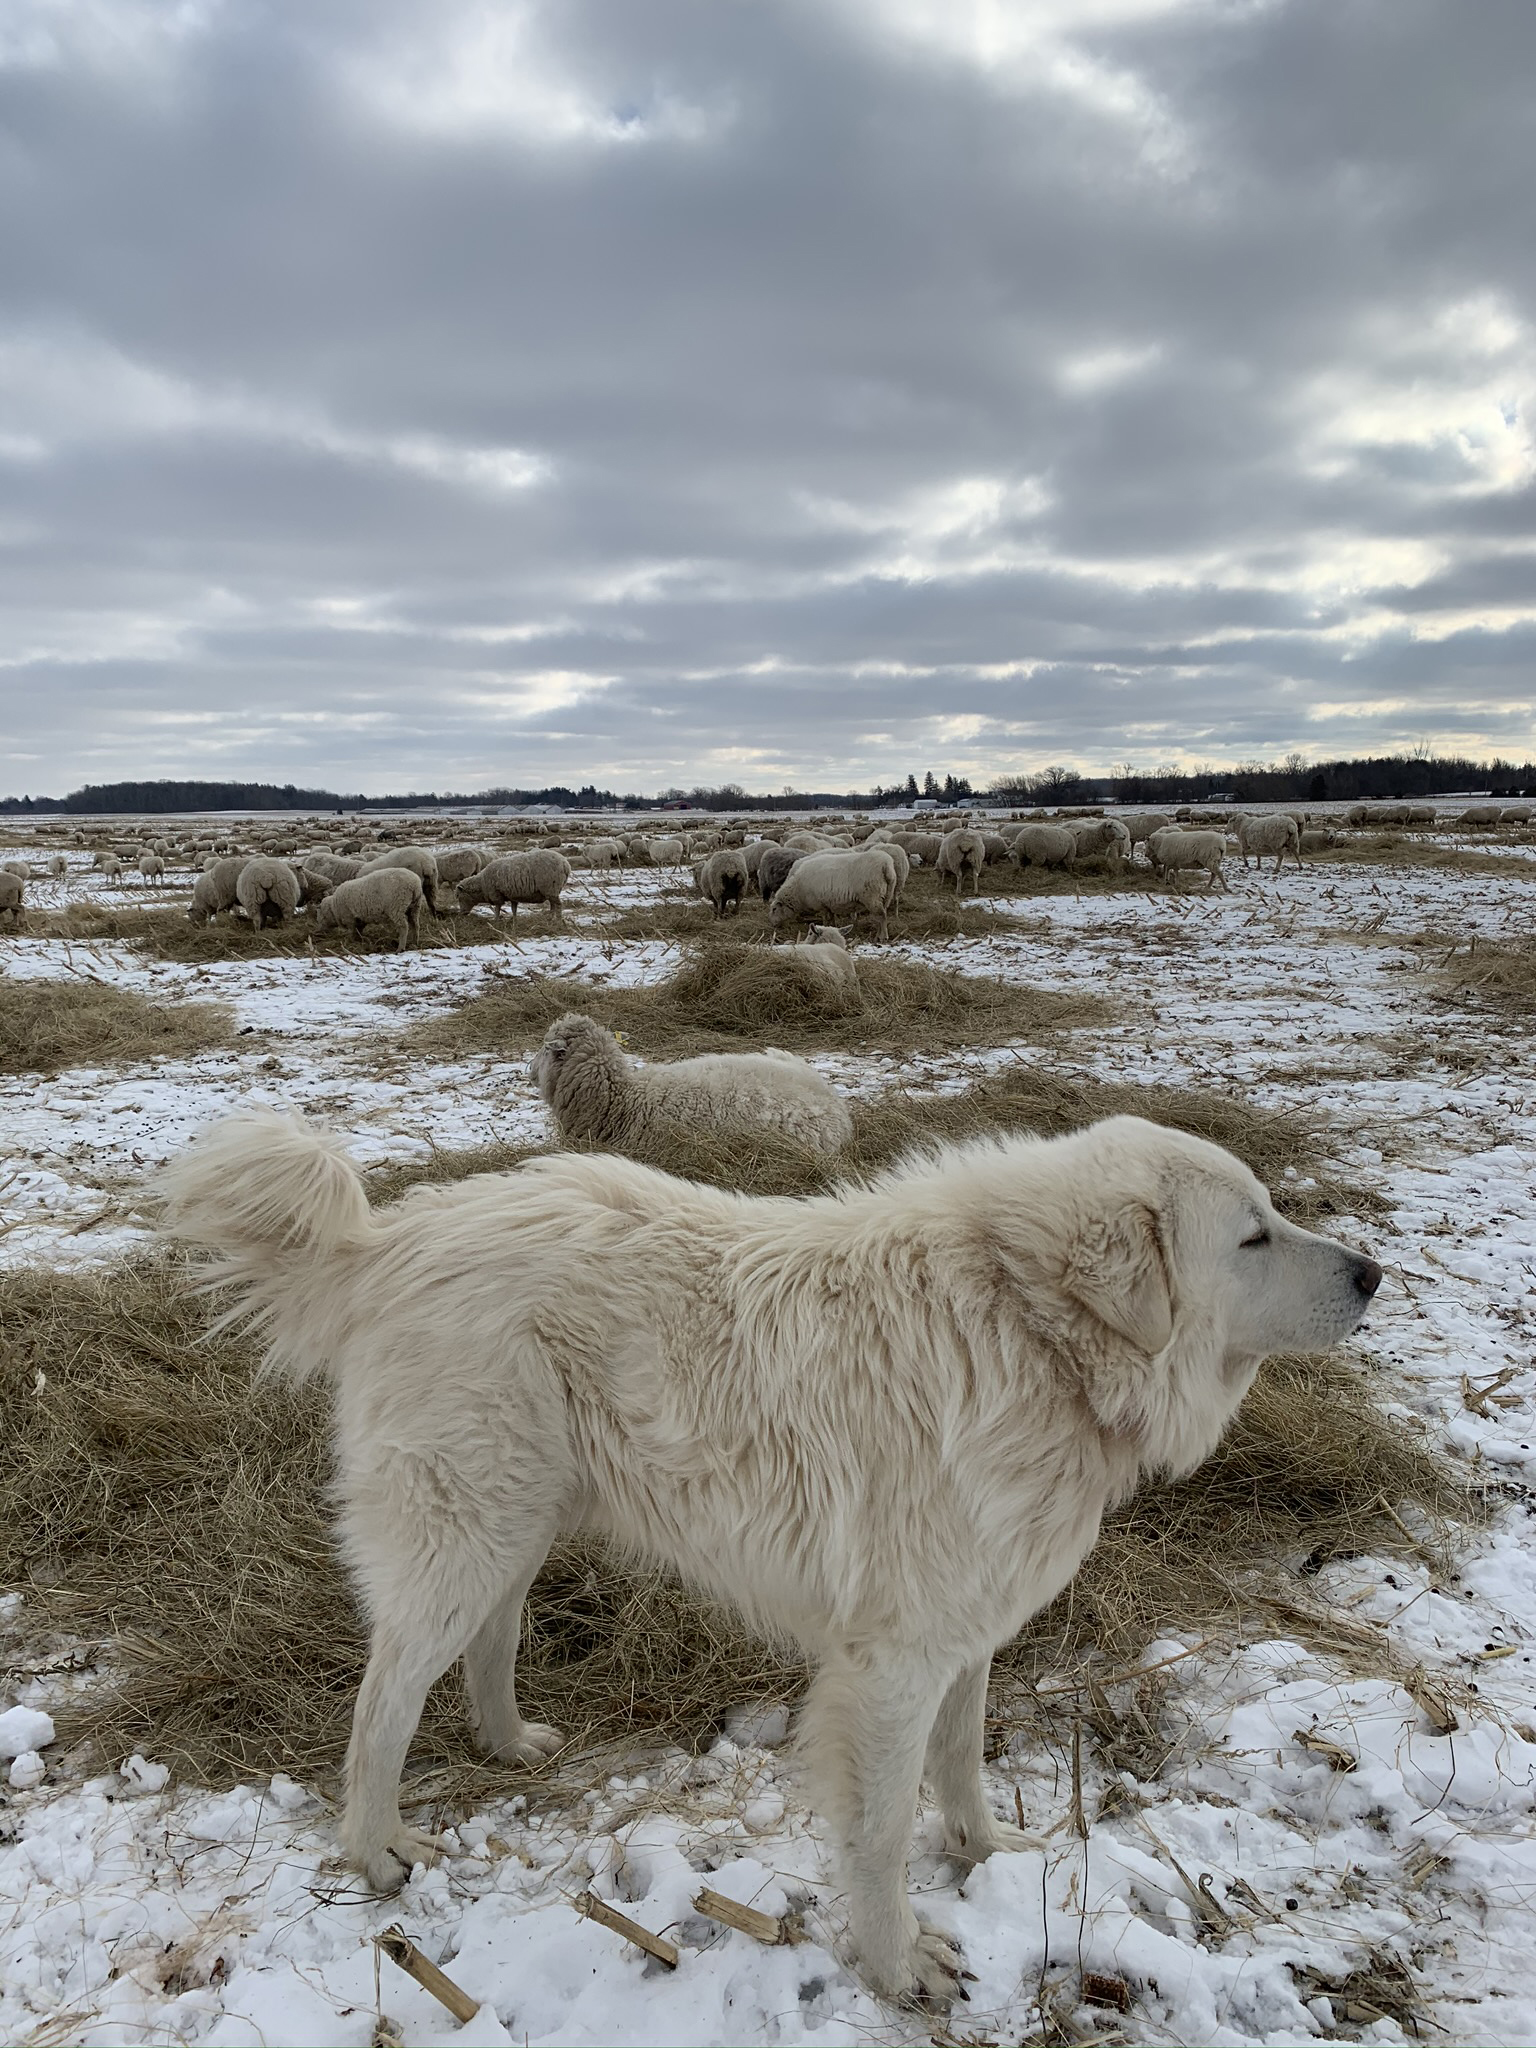 A livestock guardian dog standing in front of sheep outside in winter. Photo source: Ontario Sheep Farmers.